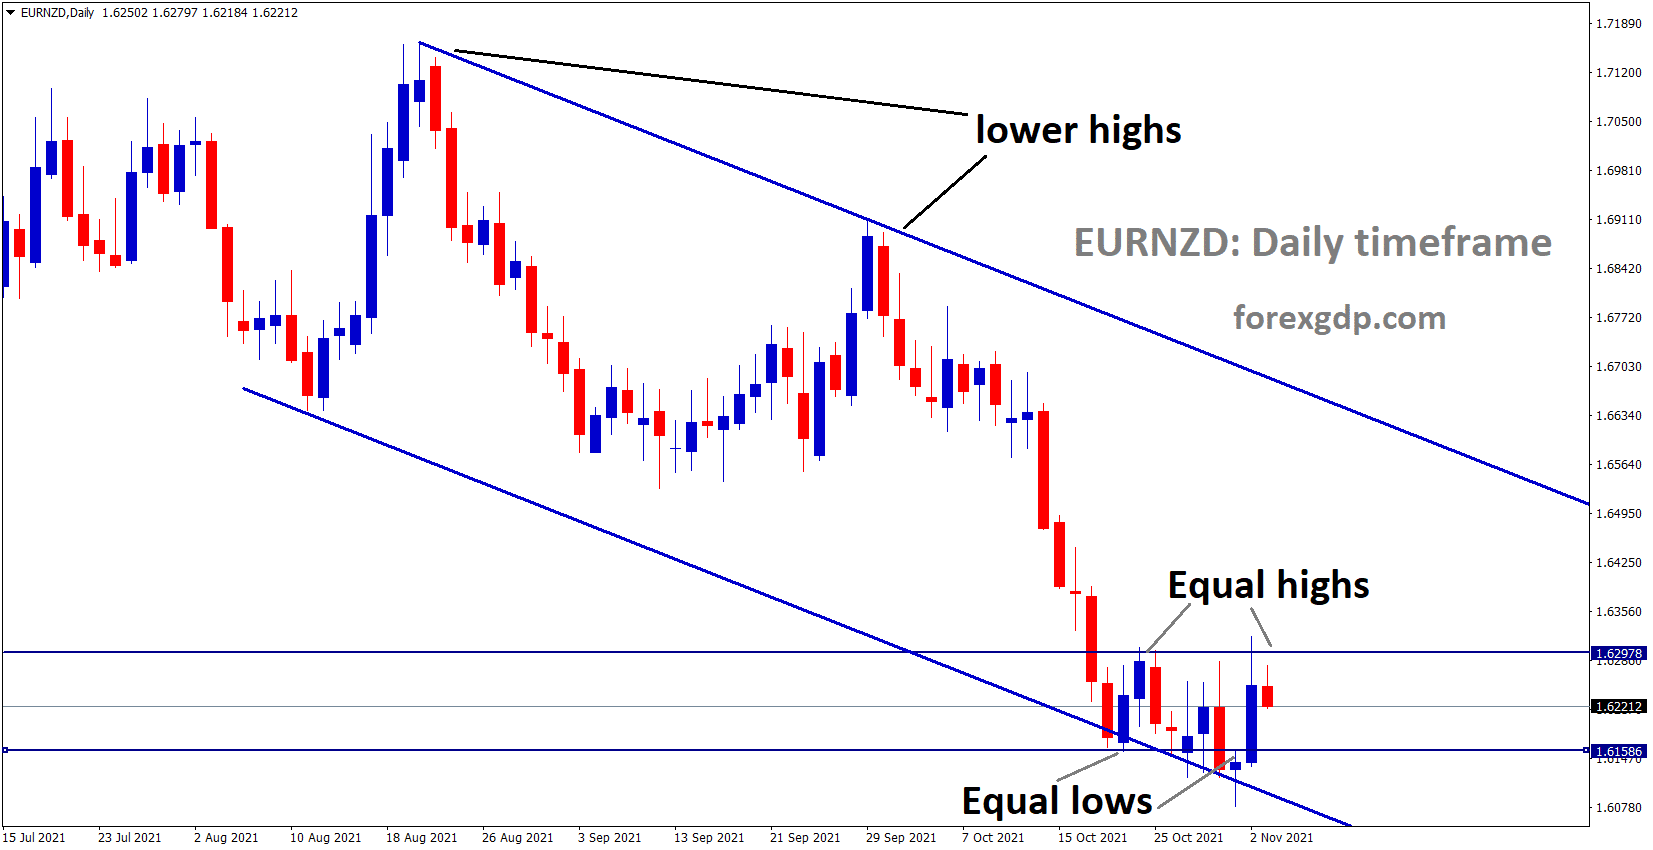 EURNZD is moving in the Descending channel and consolidated